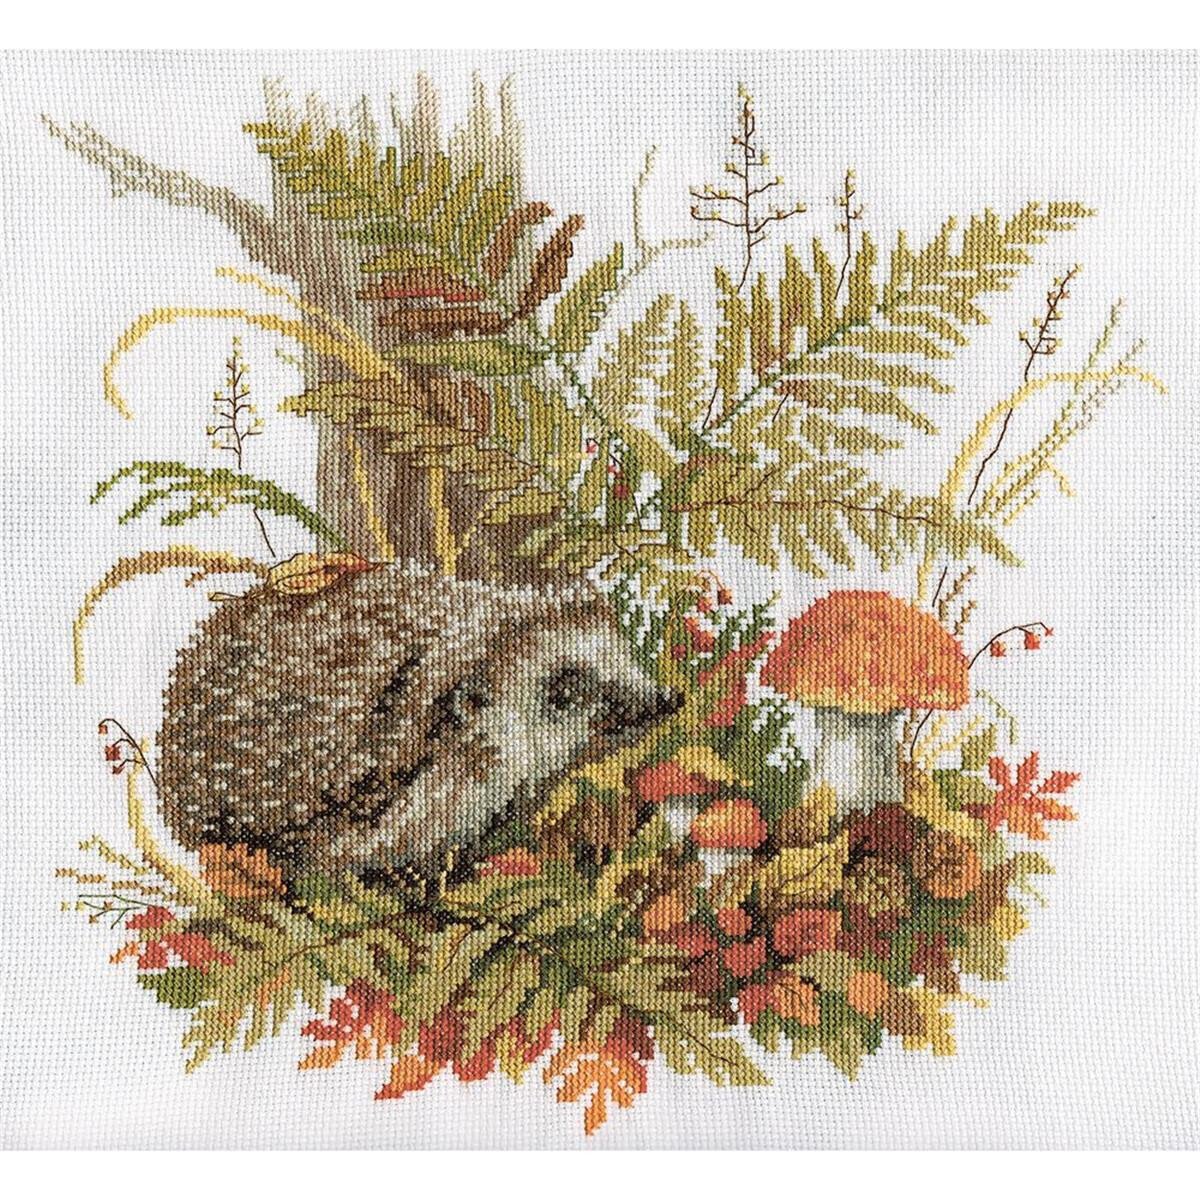 Panna counted cross stitch kit "Quiet Forager"...